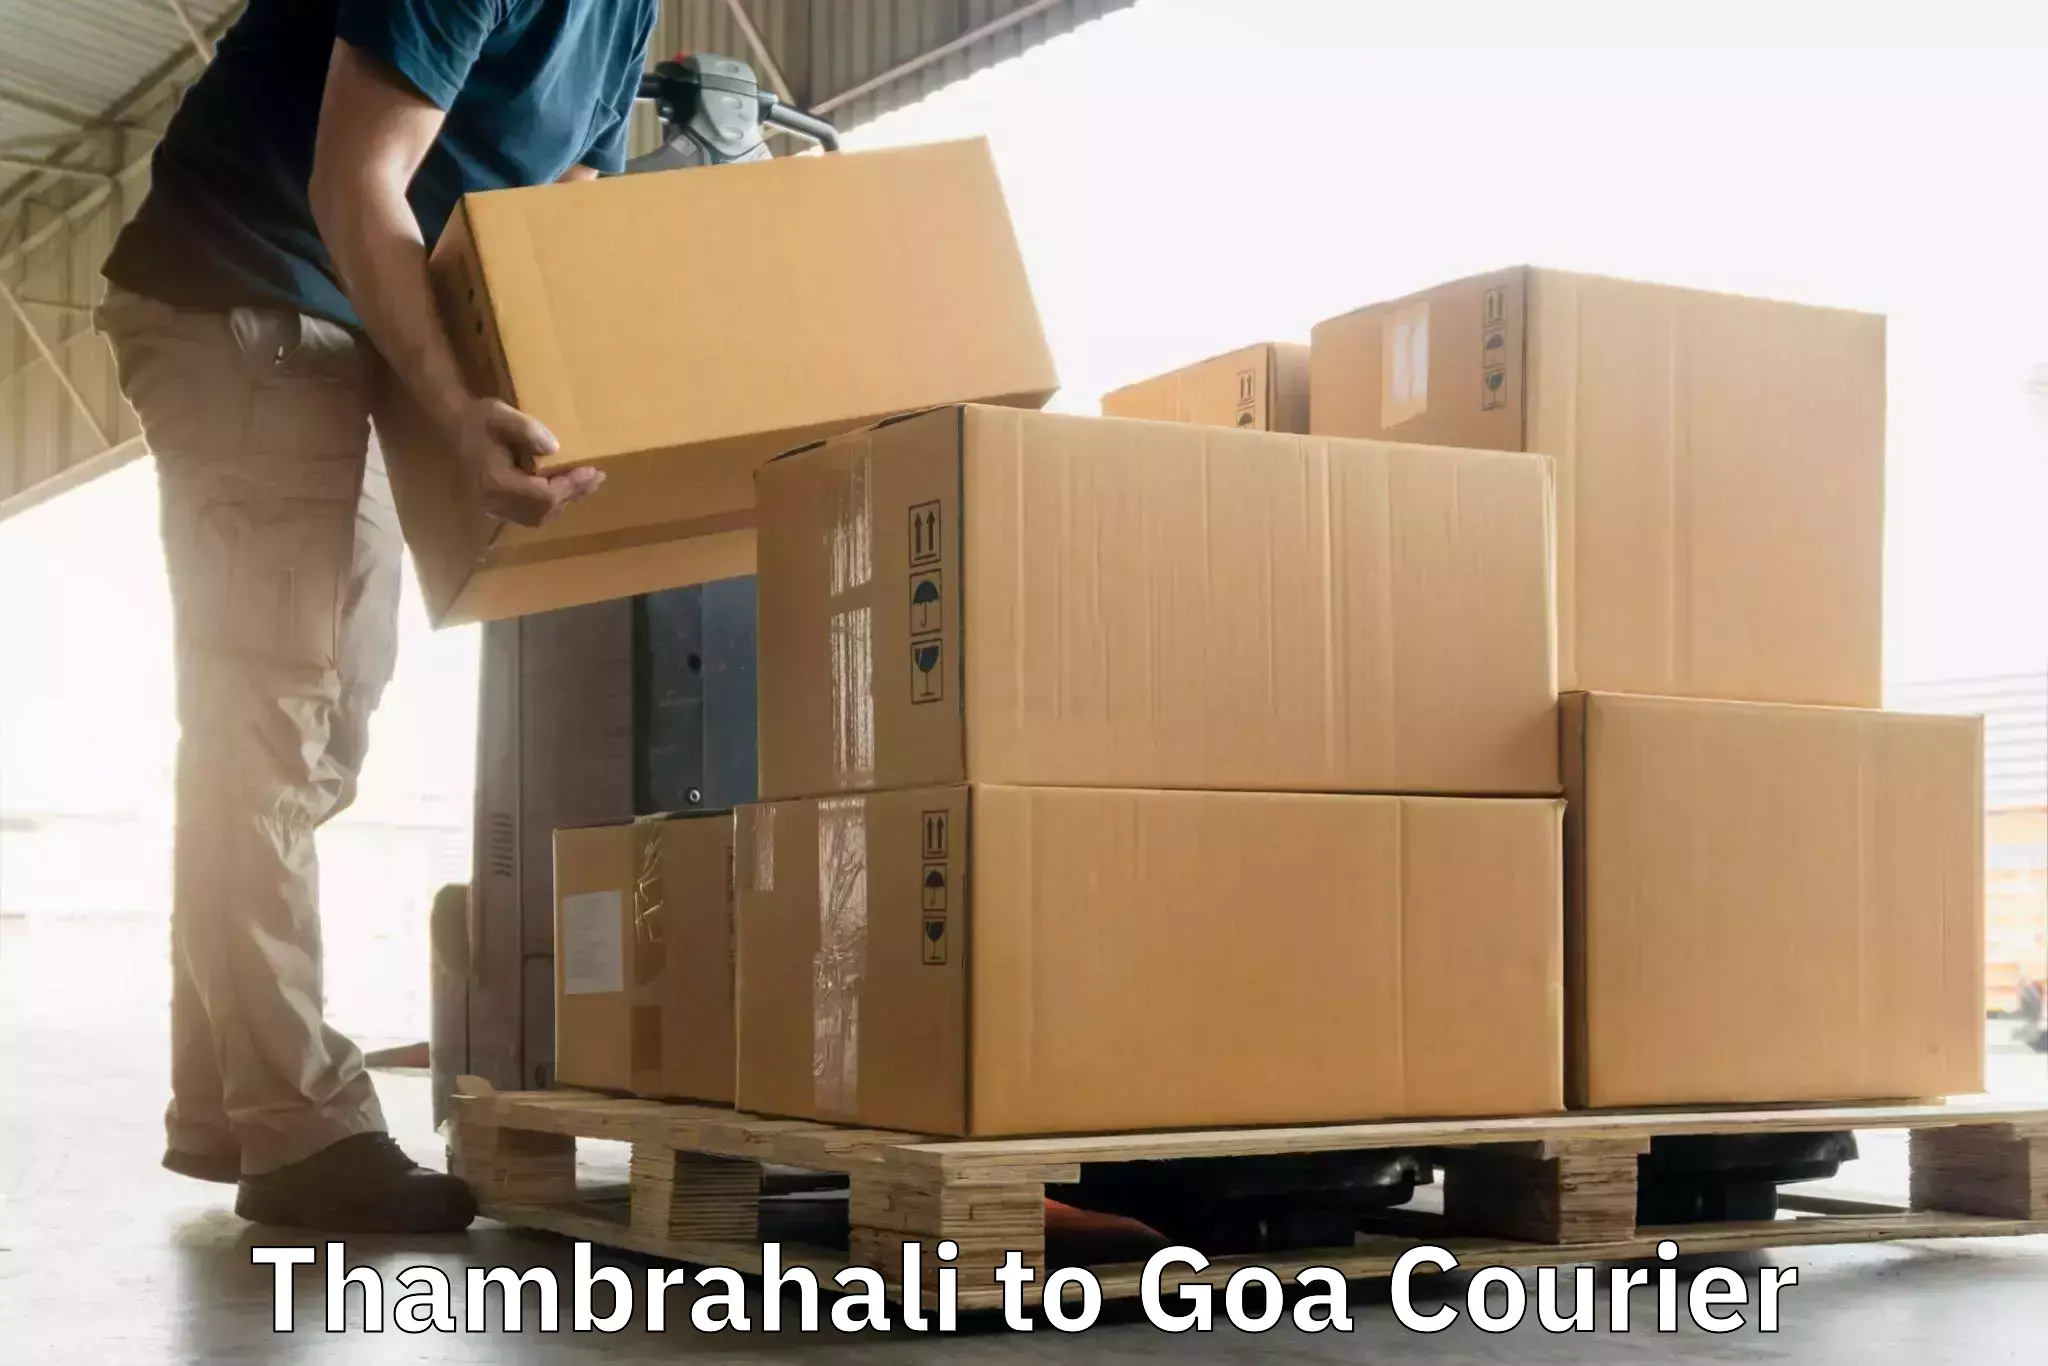 Full-service courier options Thambrahali to Goa